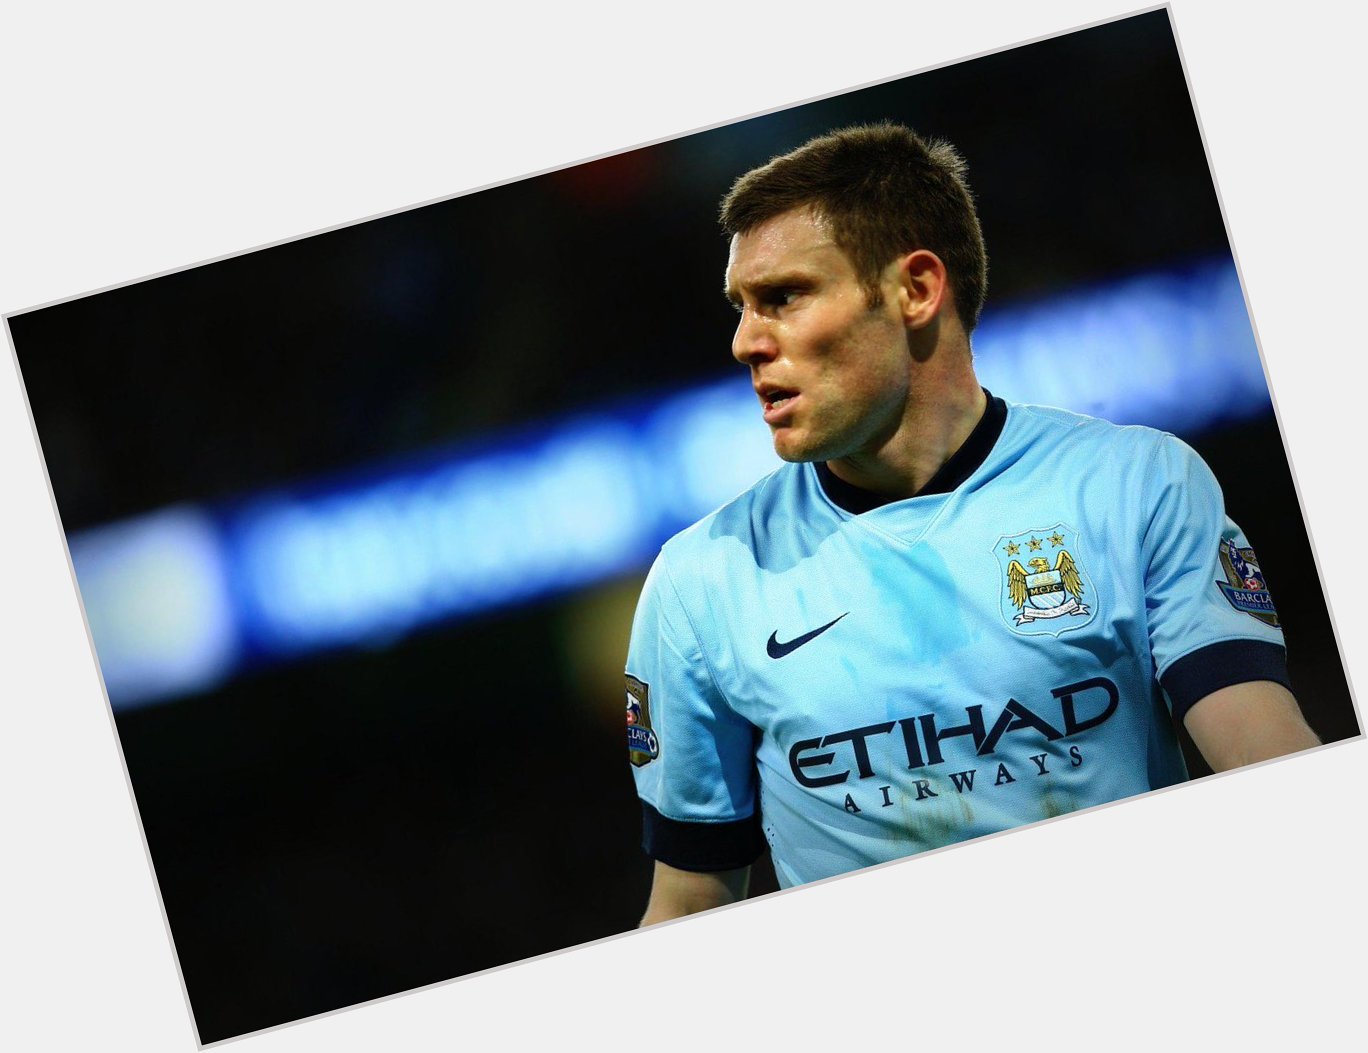 Join us in wishing James Milner a very happy 29th birthday today! 